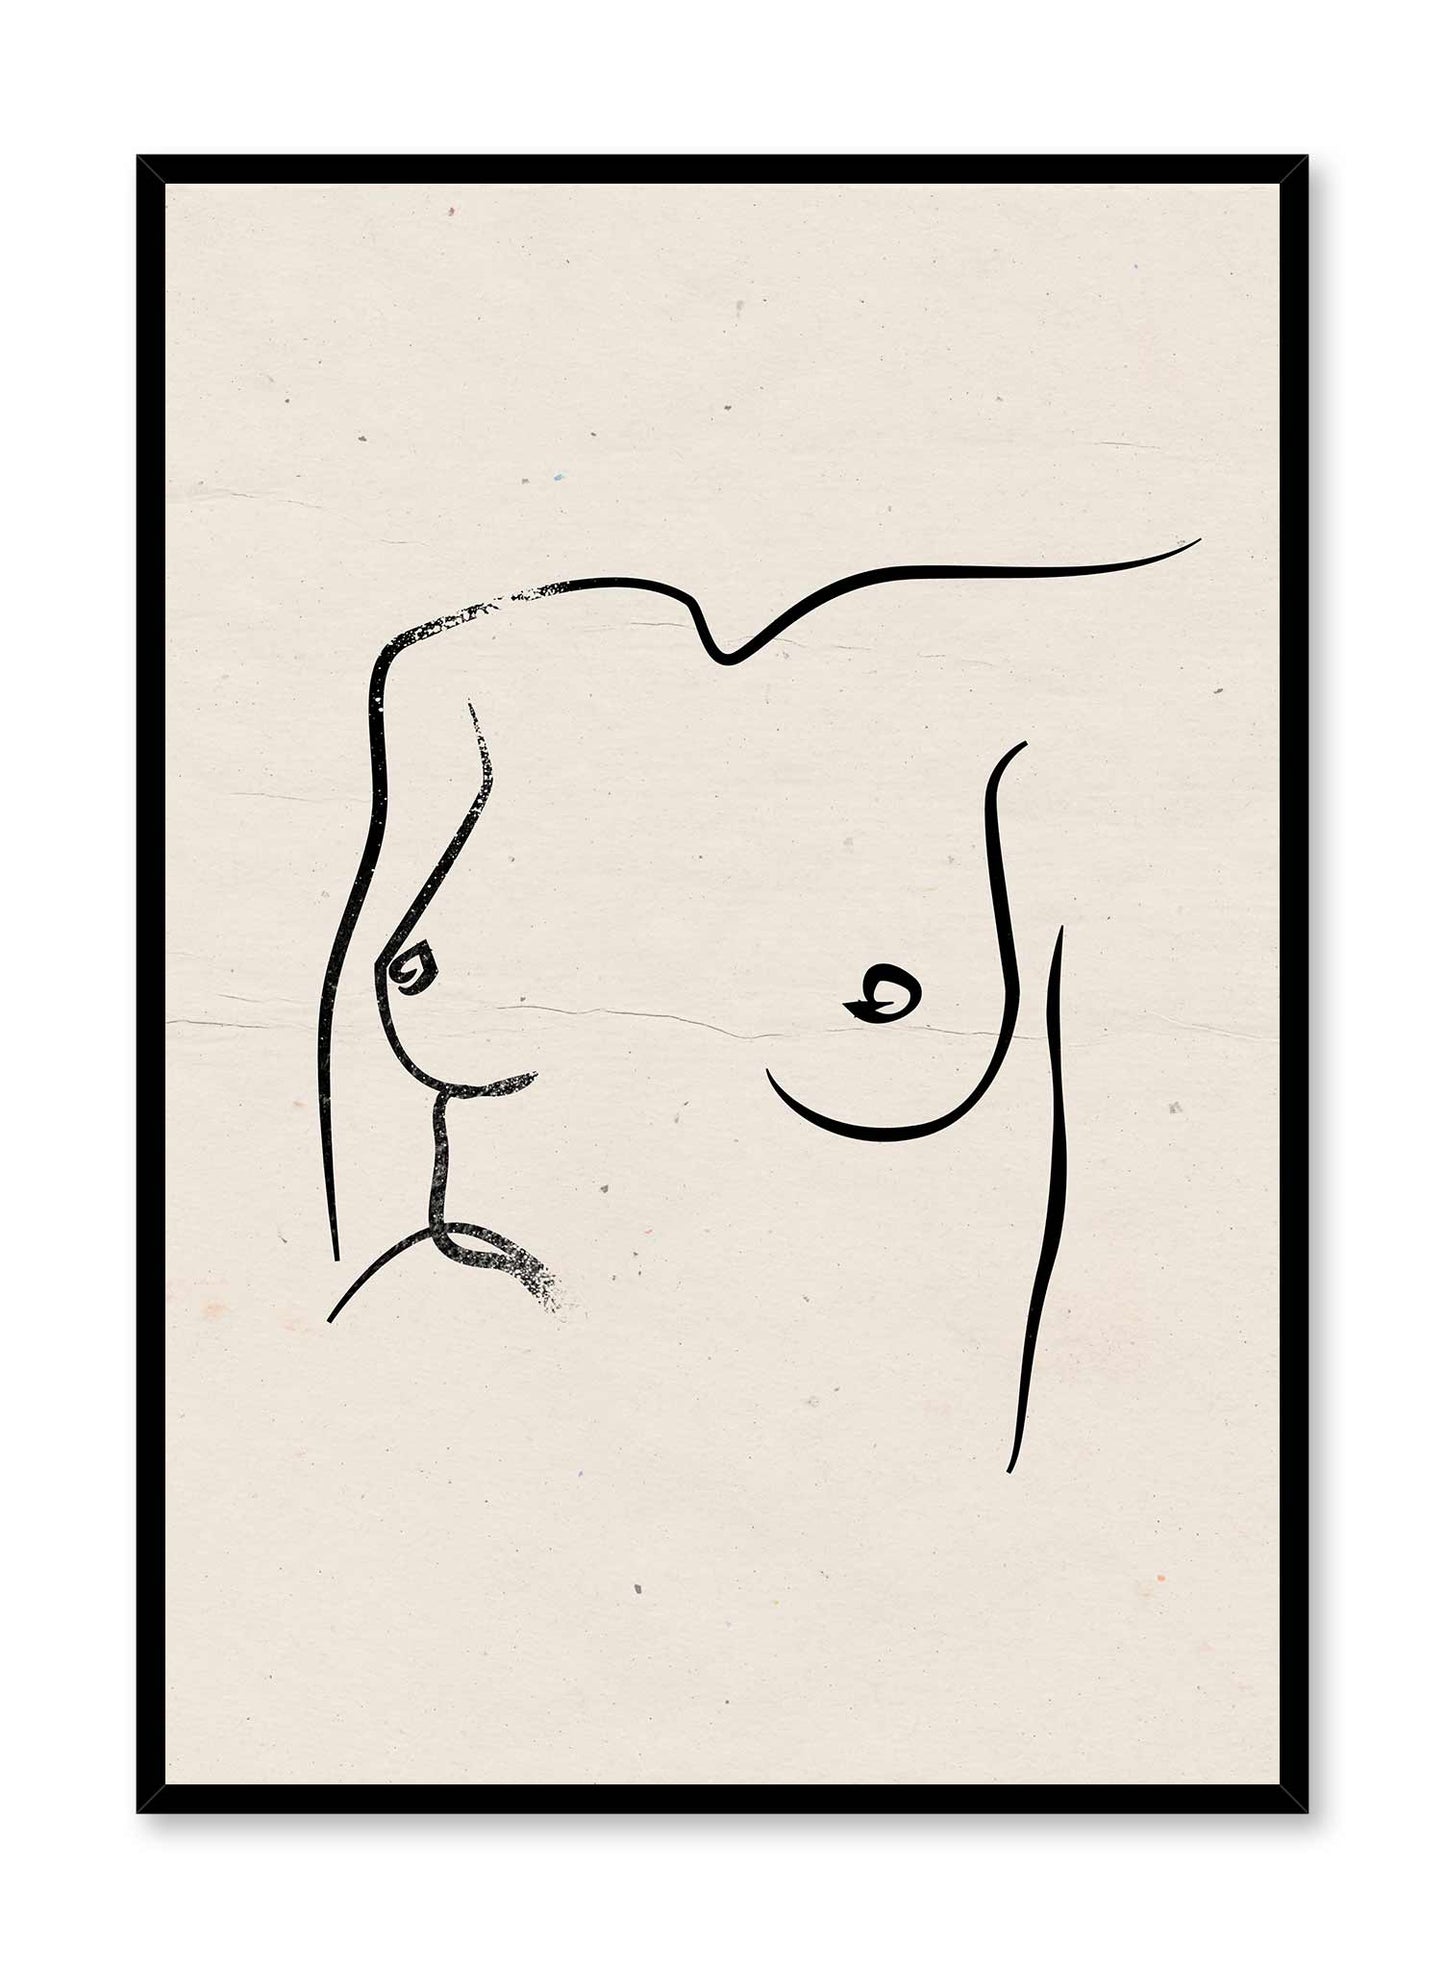 Birthday Suit is a line art illustration of a glamorous woman's chest by Opposite Wall.